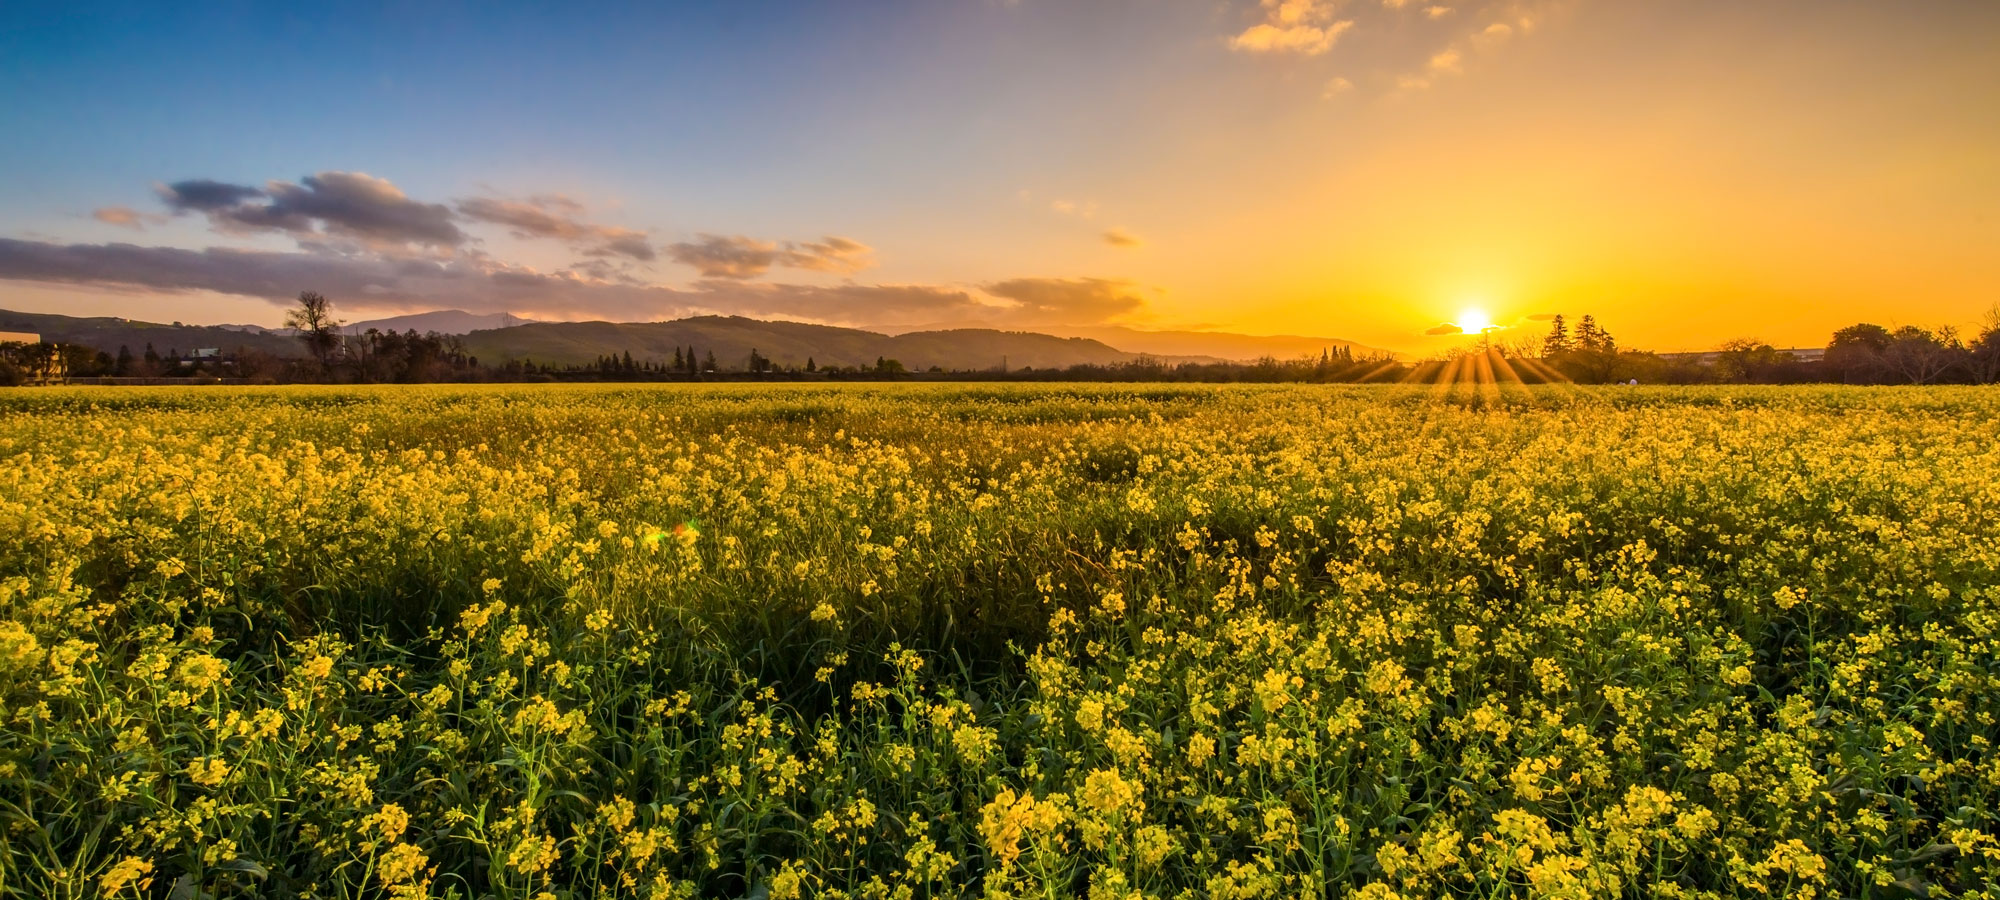 California field of flowers at sunset ppic 30th hero d3